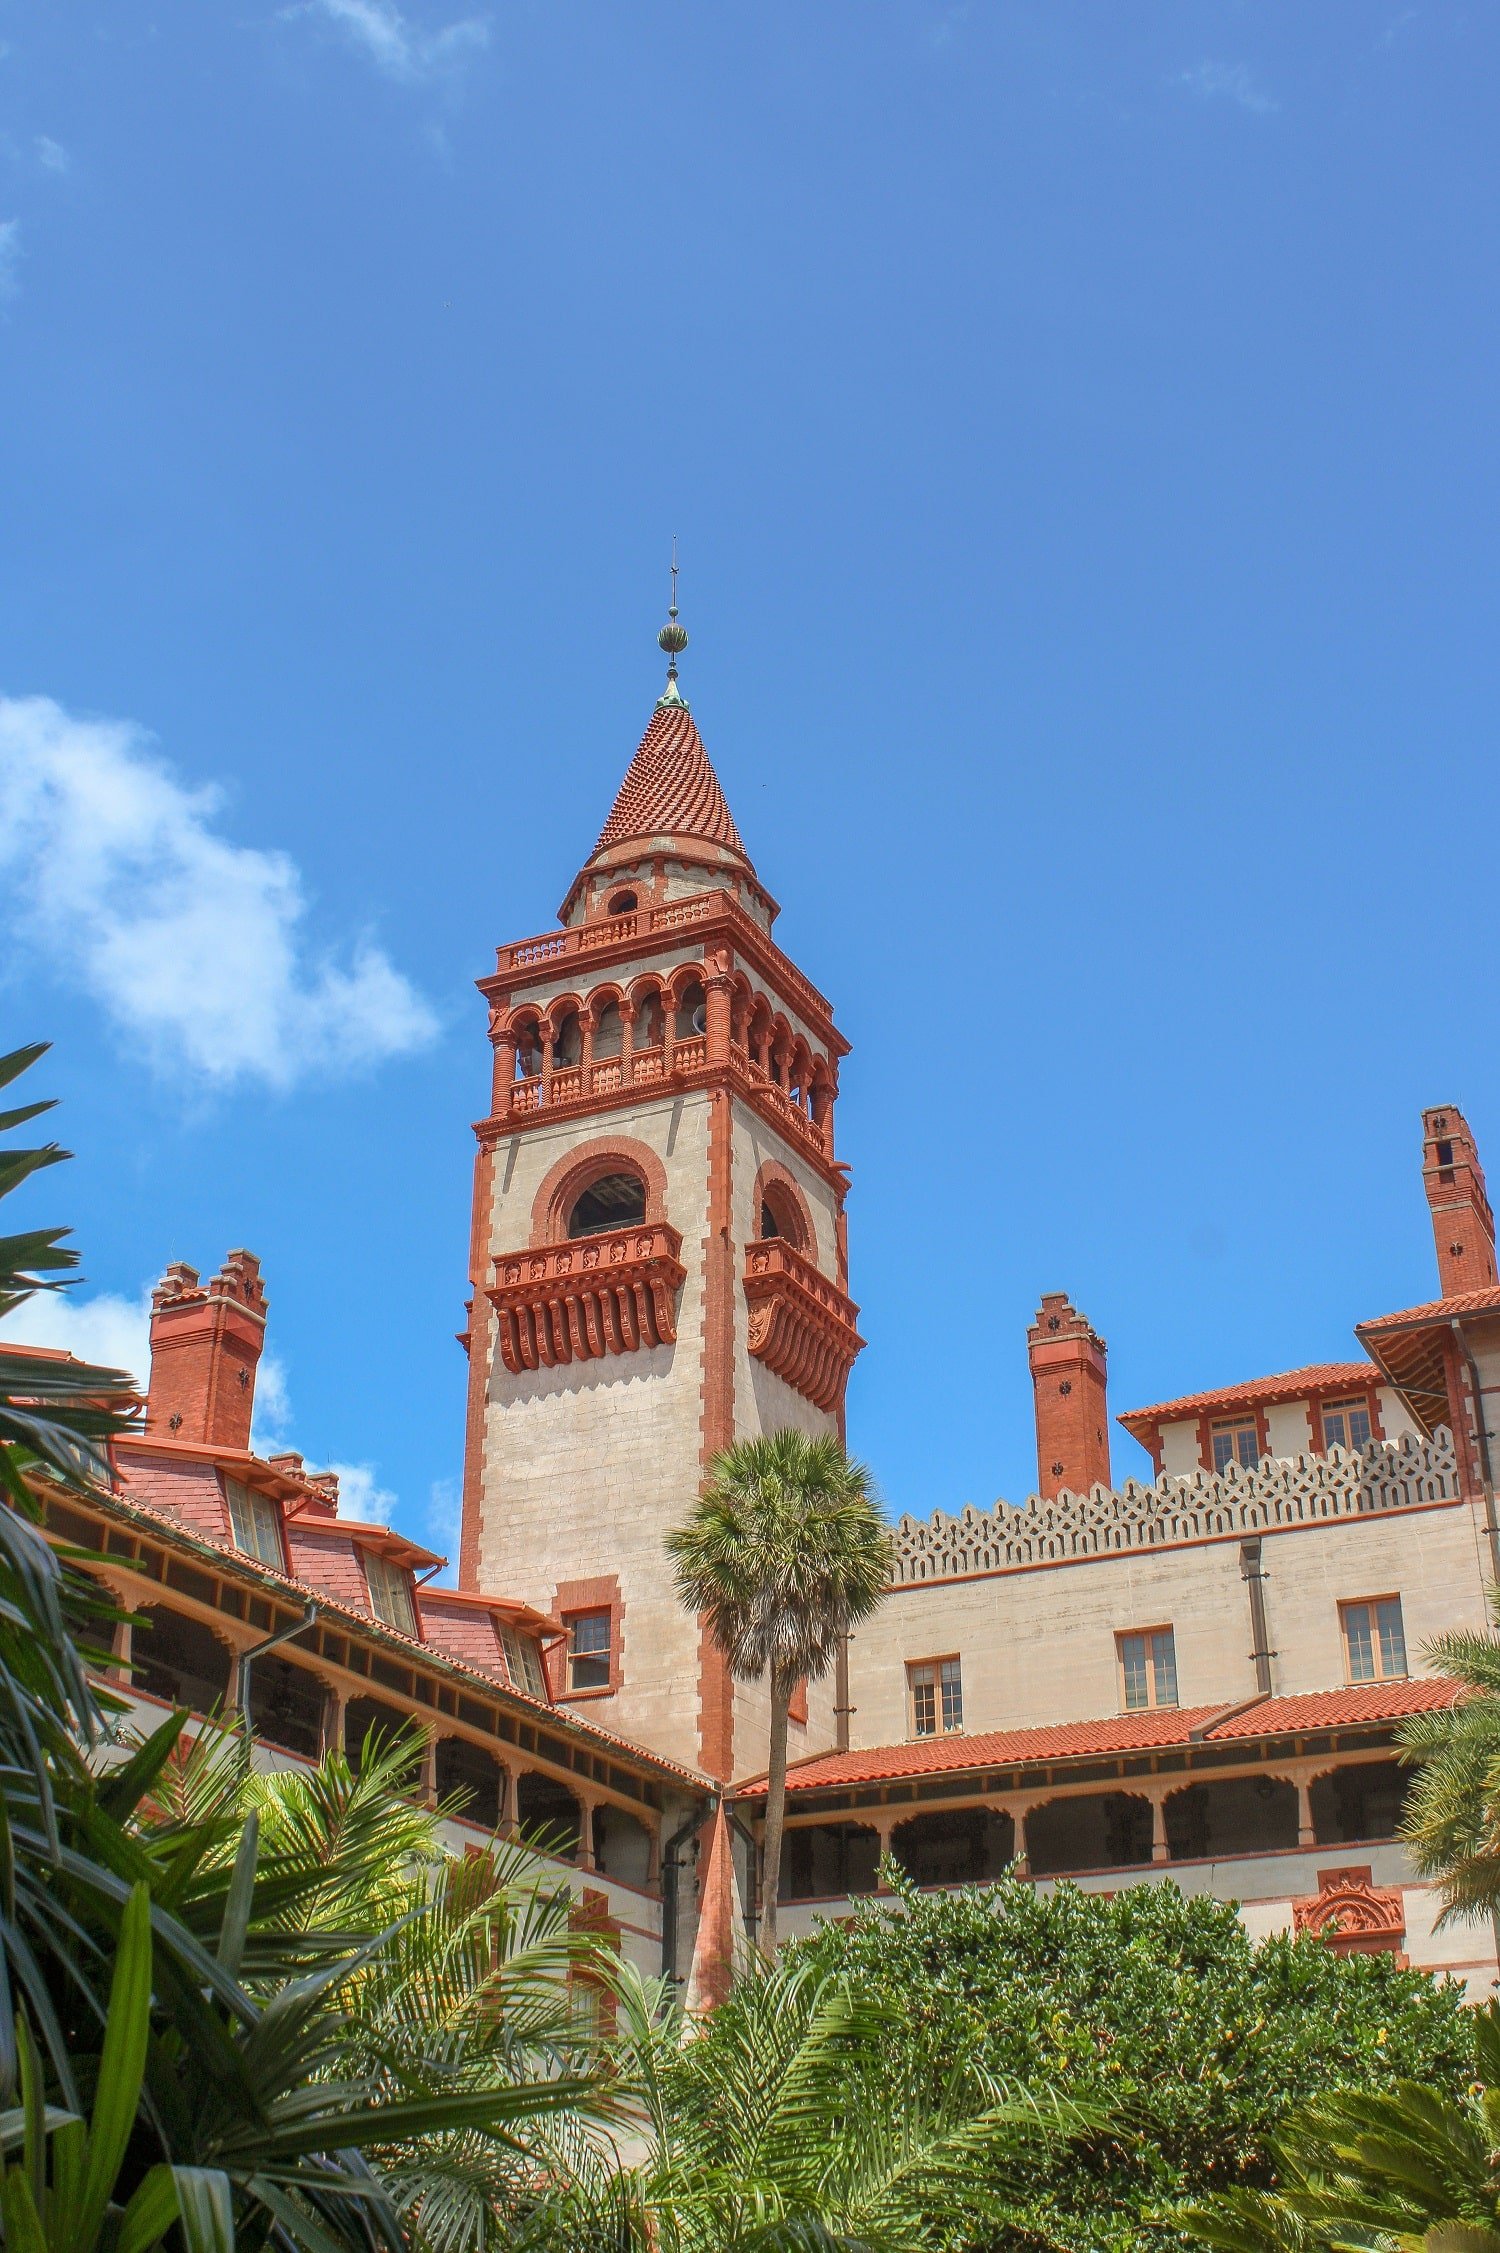 Saint Augustine, a slice of Europe in Florida | Blooming Magnolias Blog | Travel, Florida travel, historic places, historic cities, Flagler College